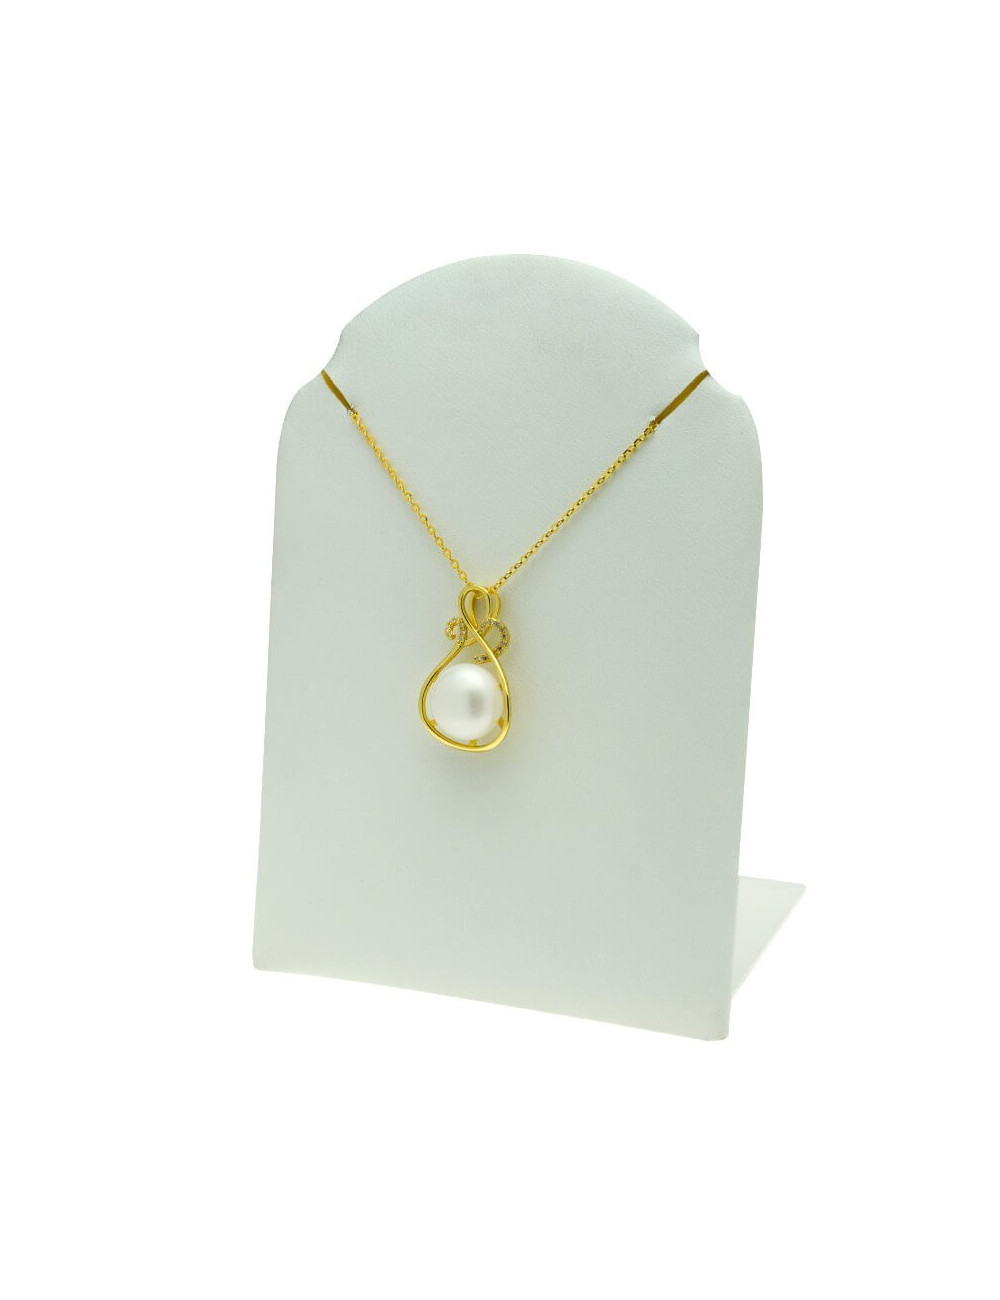 Silver gold-plated chain with white pearl placed on a teardrop-shaped pendant with a fancy design LAN1112SG2